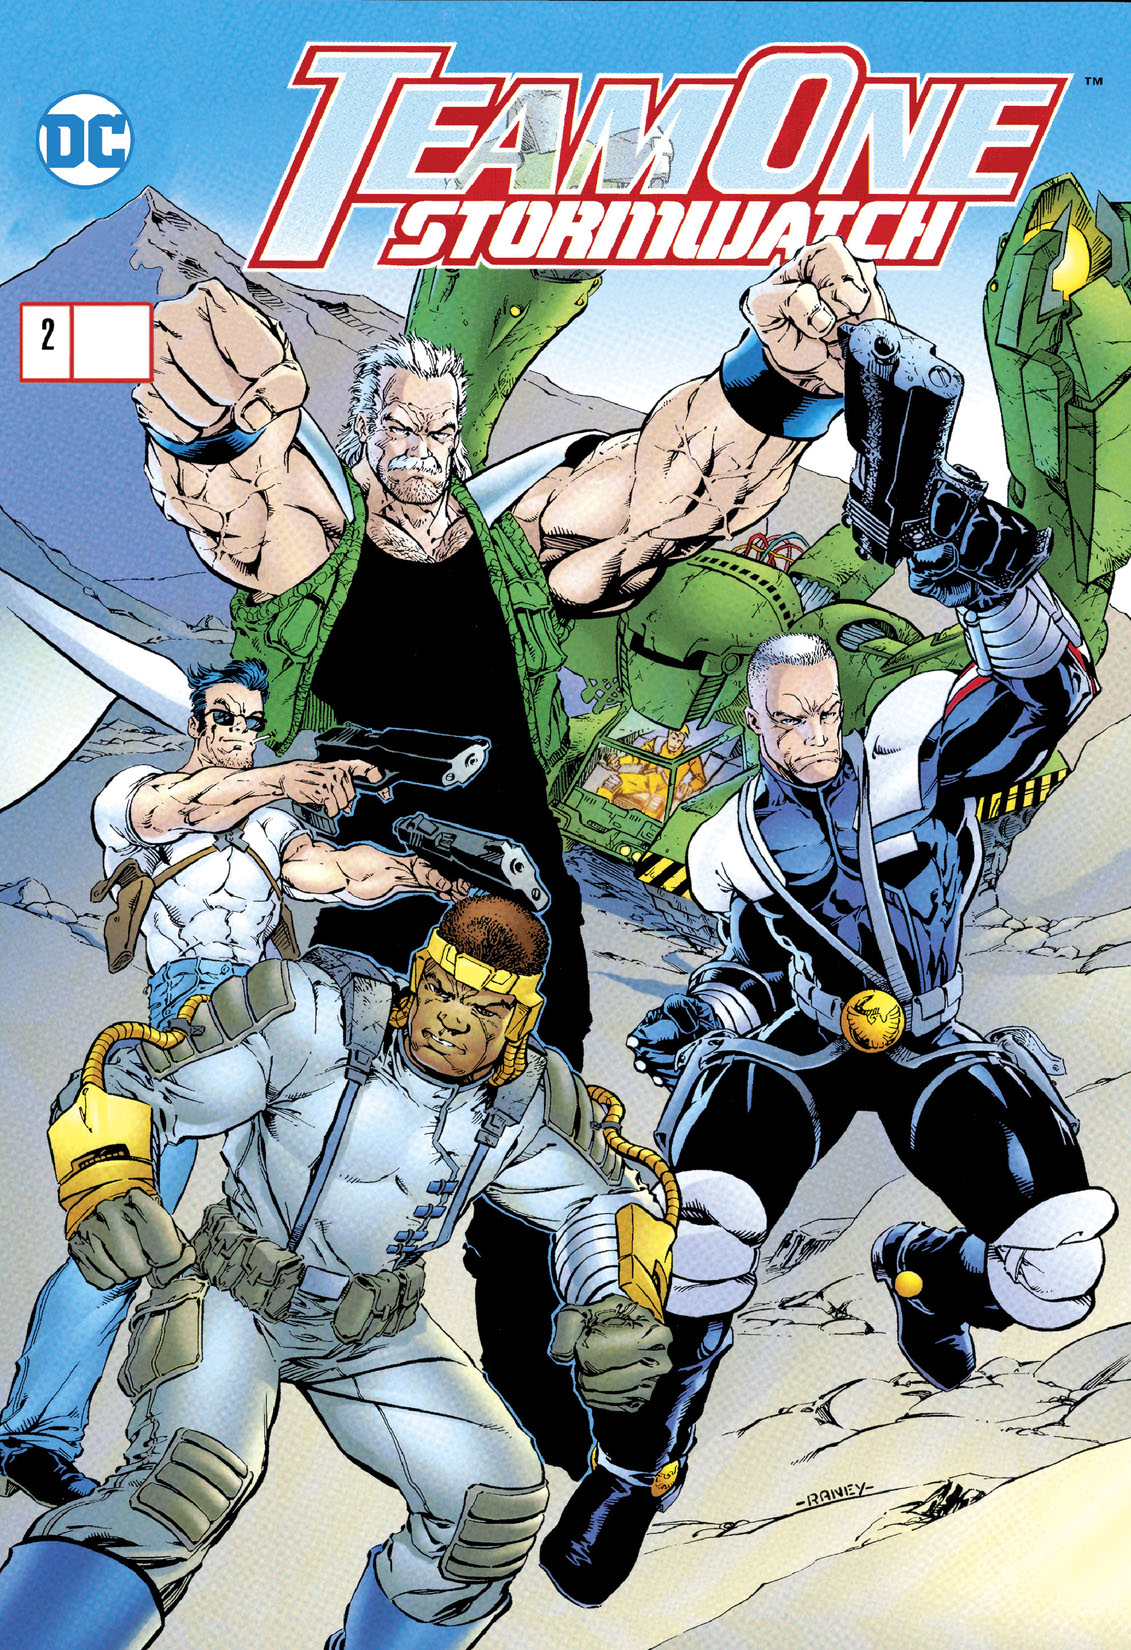 Team One: Stormwatch #2 preview images